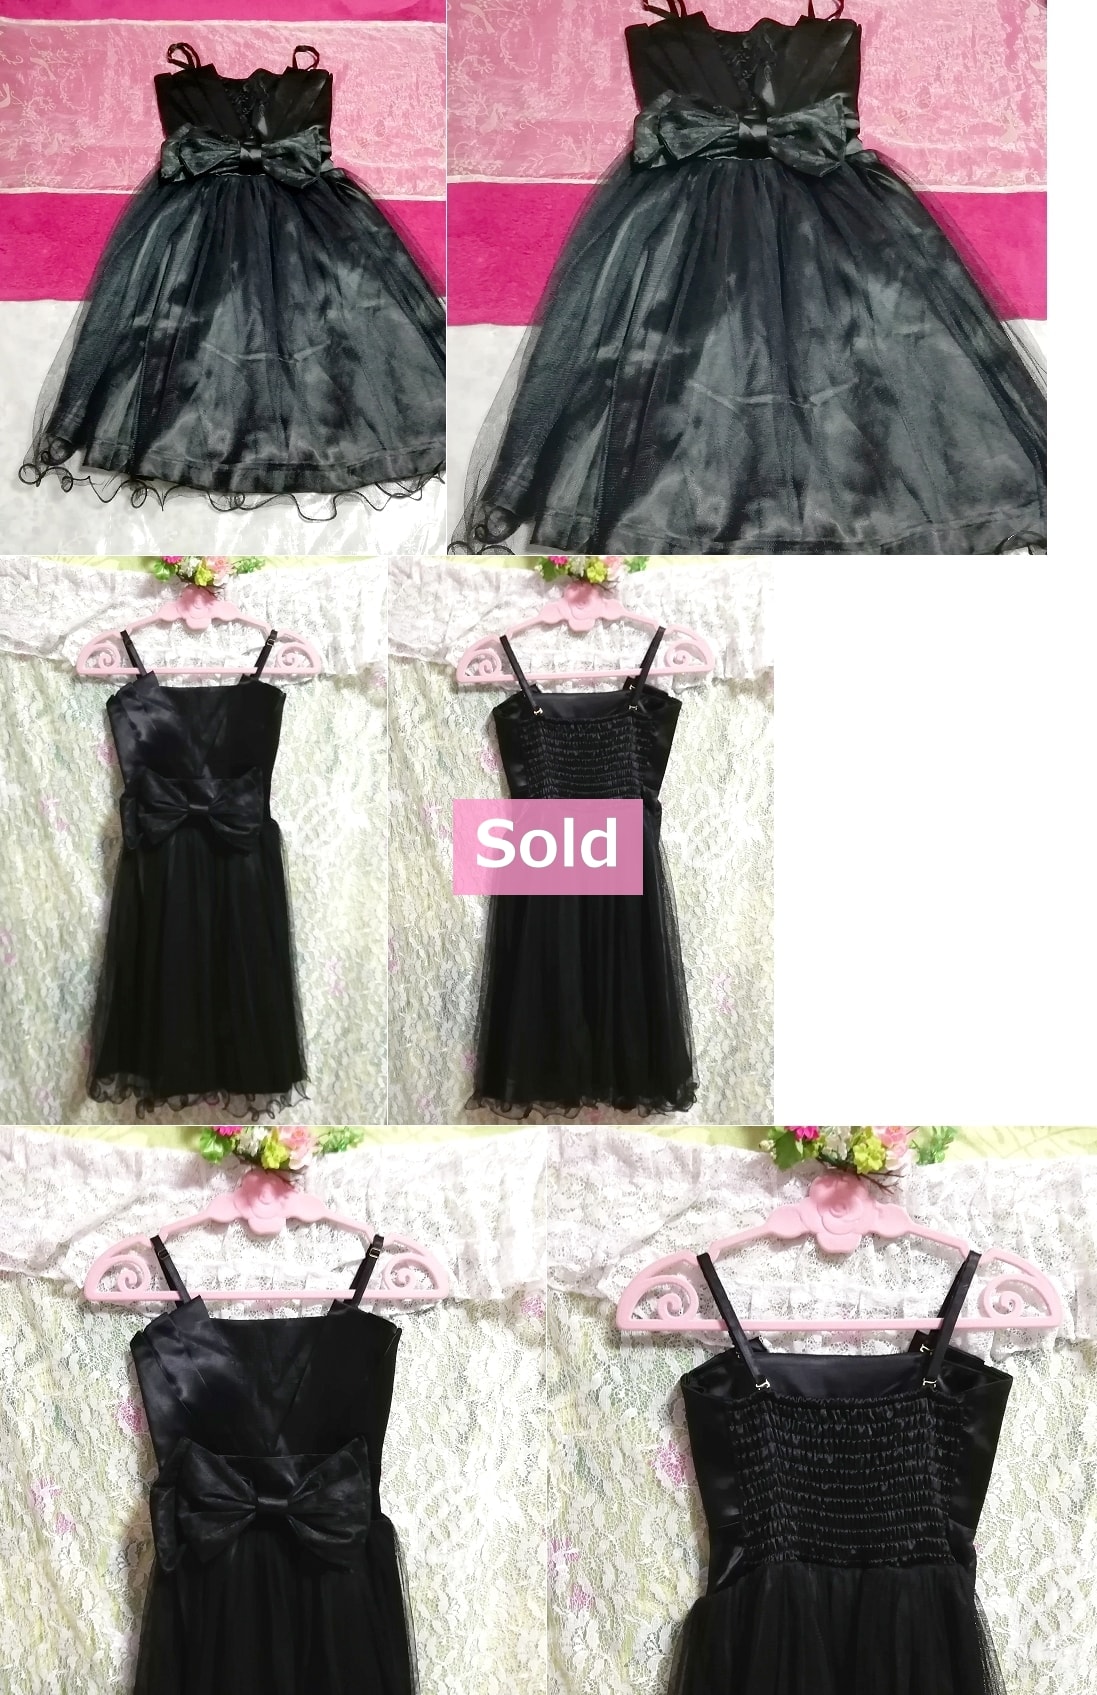 Black camisole one piece tulle skirt dress Black camisole one piece tulle skirt dress